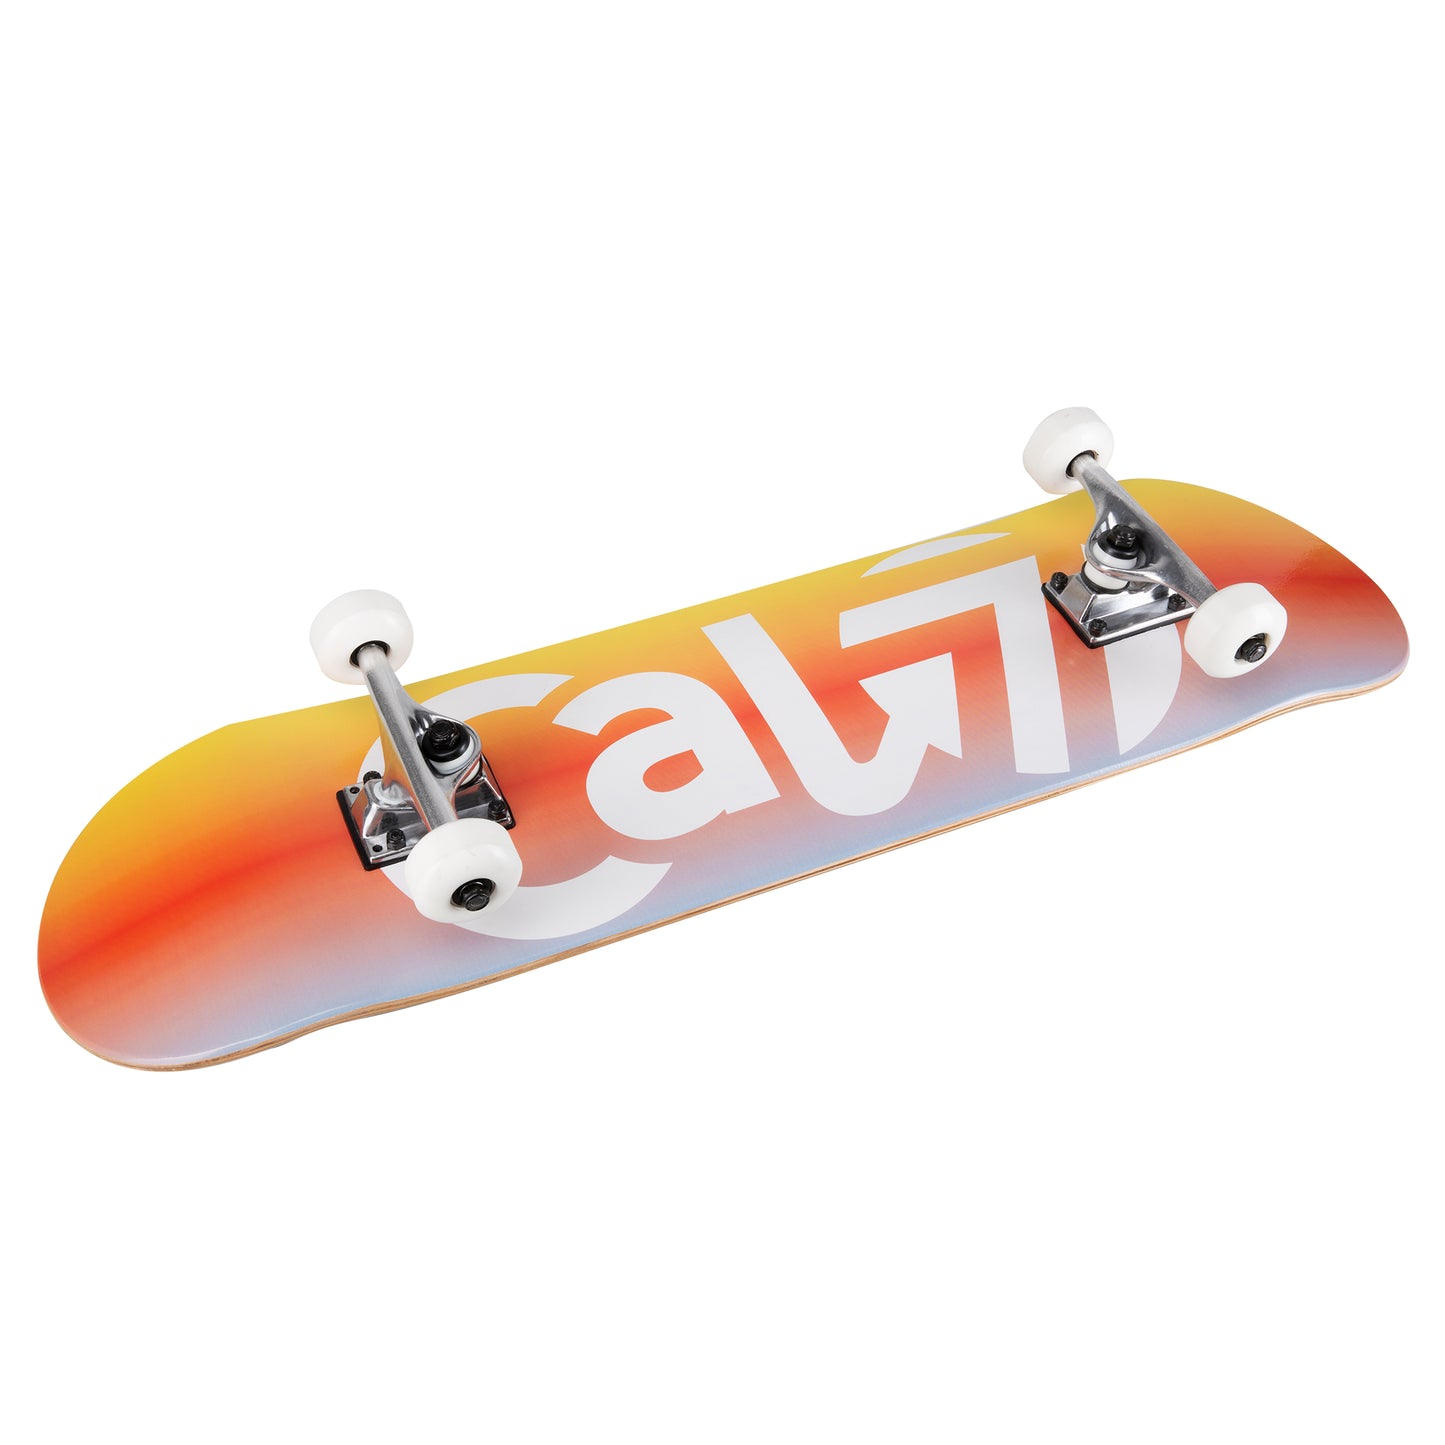 Cal 7 complete 8-inch skateboard with blue, red and yellow Nova graphic